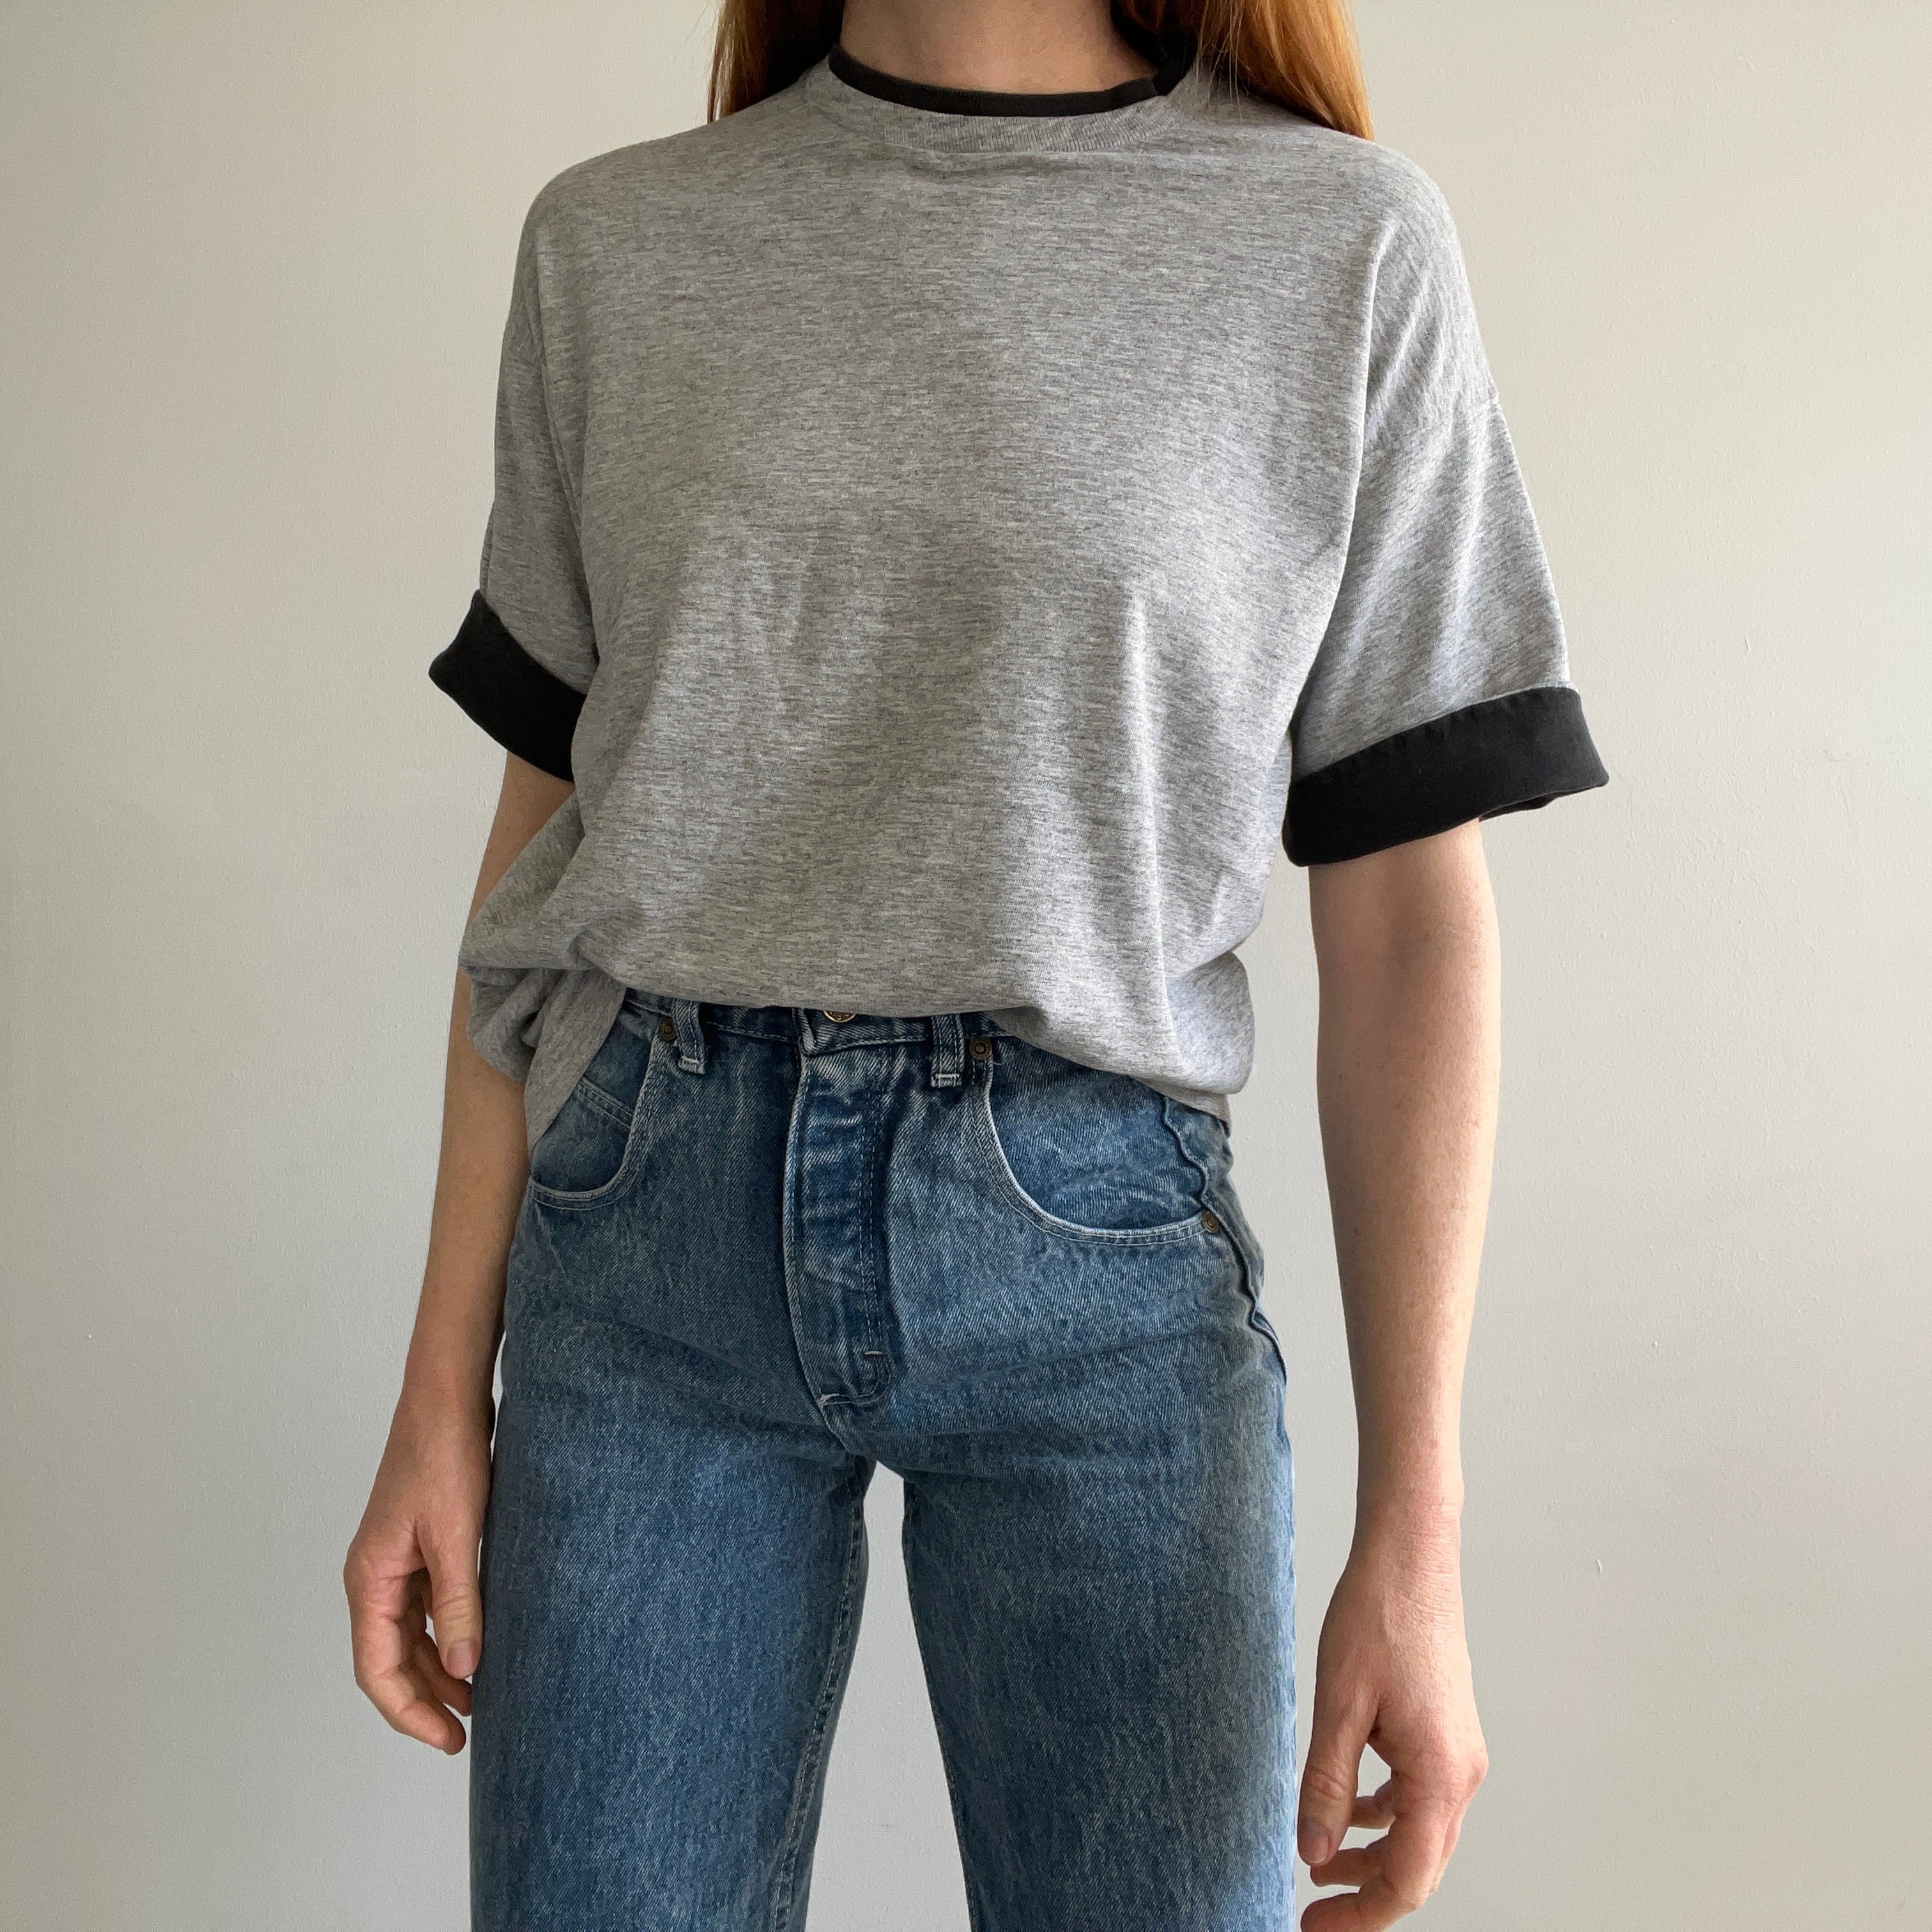 1990s Two Tone Contrast Roll Up Sleeve Gray and Black T-Shirt